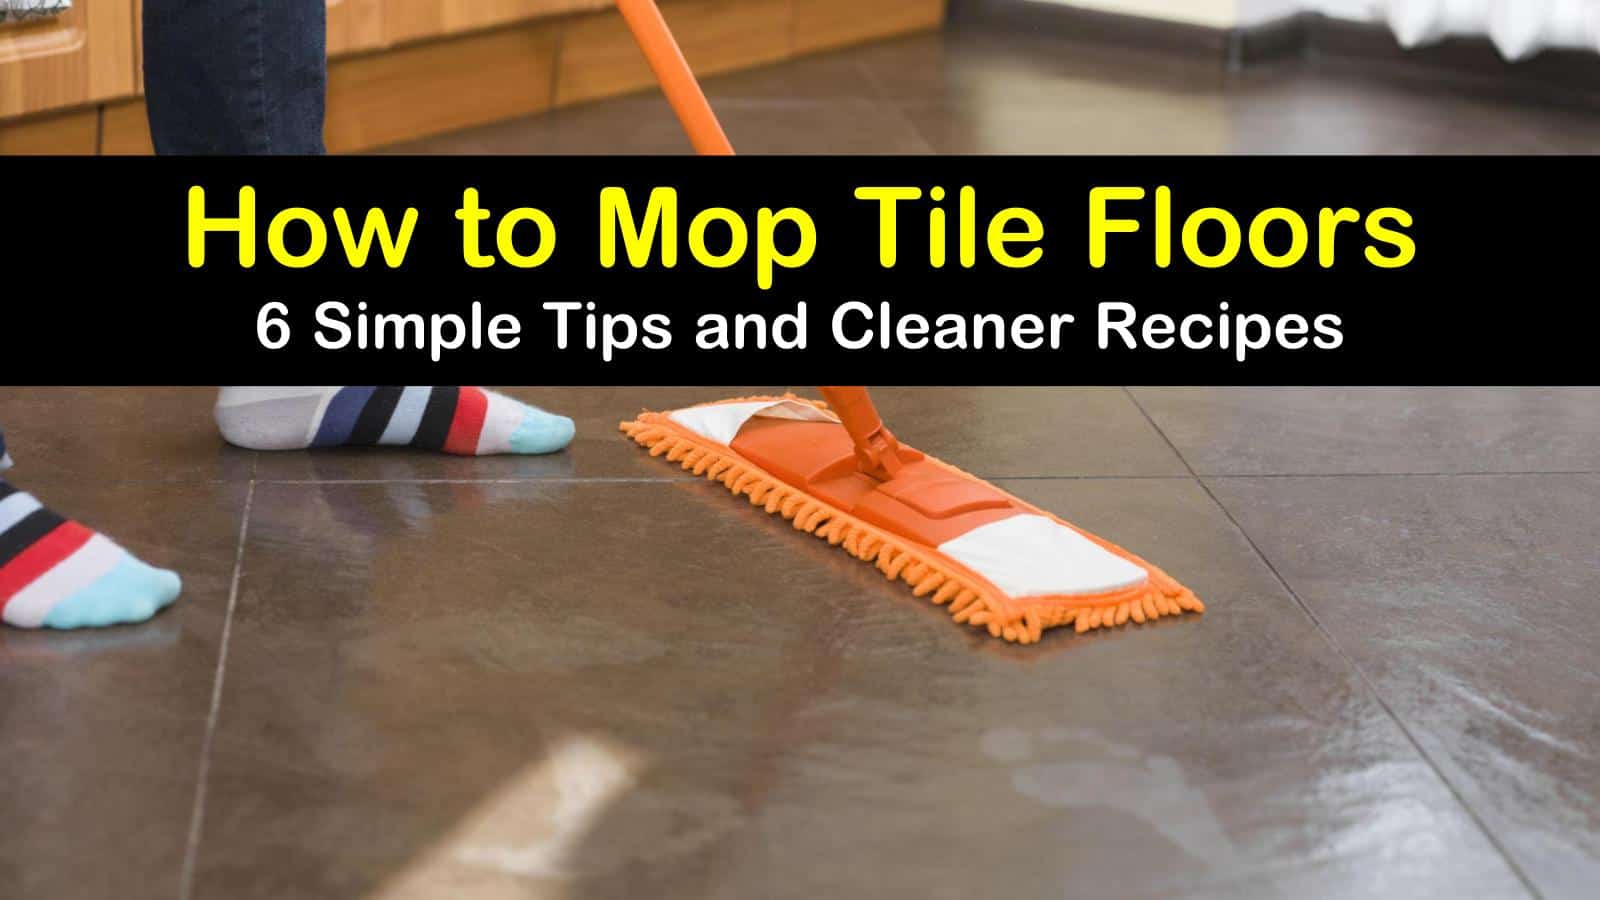 6 Simple Ways To Mop Tile Floors, How To Mop Tile Floors Without Streaks